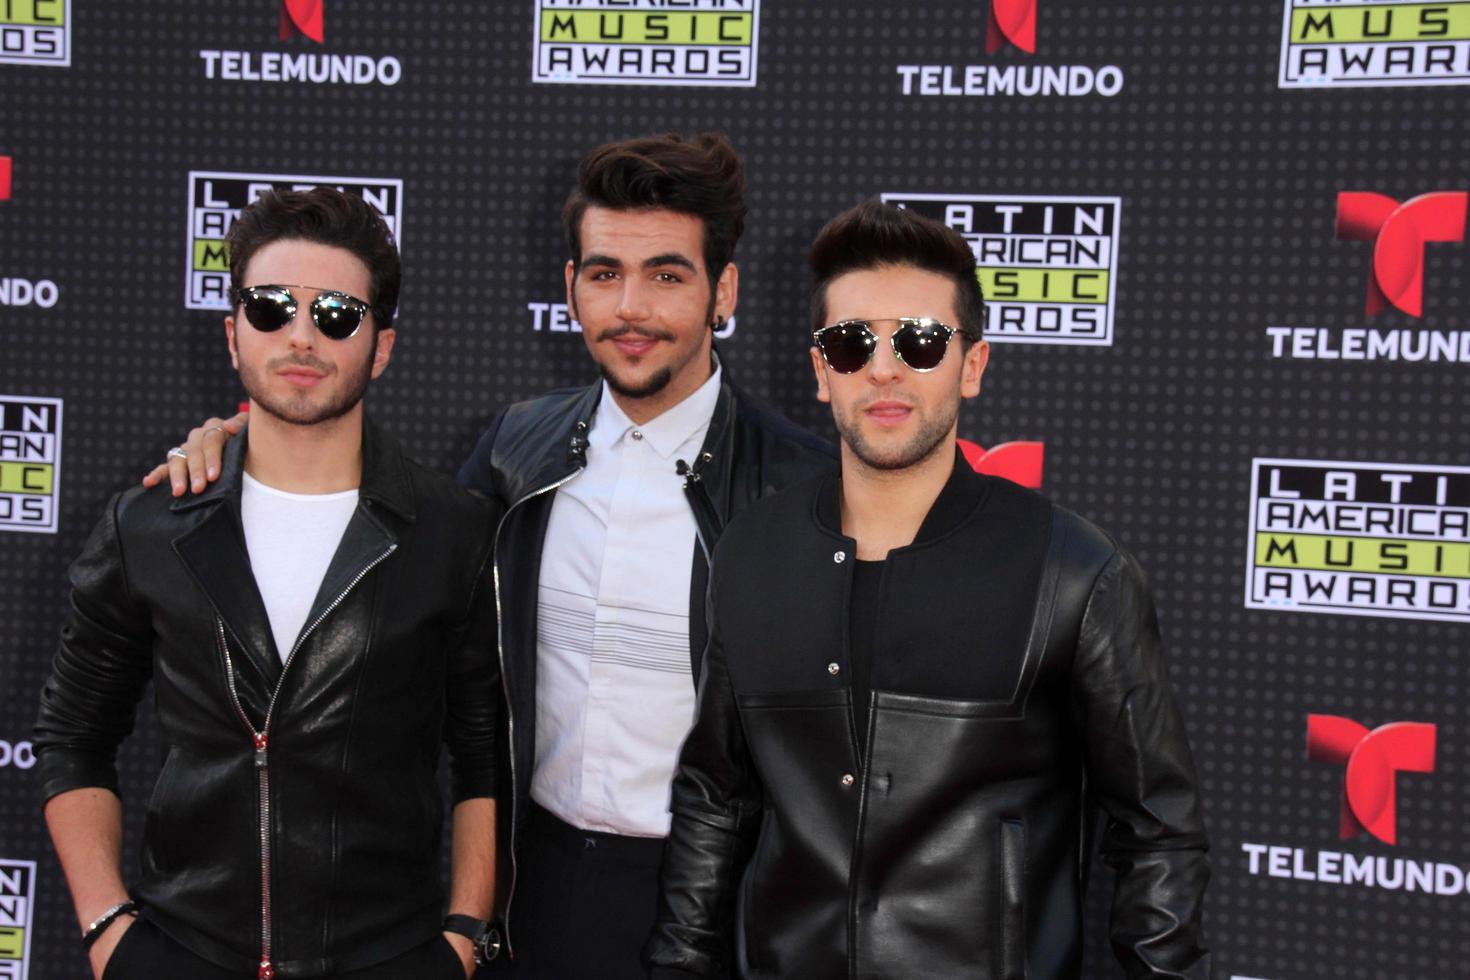 LOS ANGELES, OCT 8 -  Il Volo at the Latin American Music Awards at the Dolby Theater on October 8, 2015 in Los Angeles, CA photo